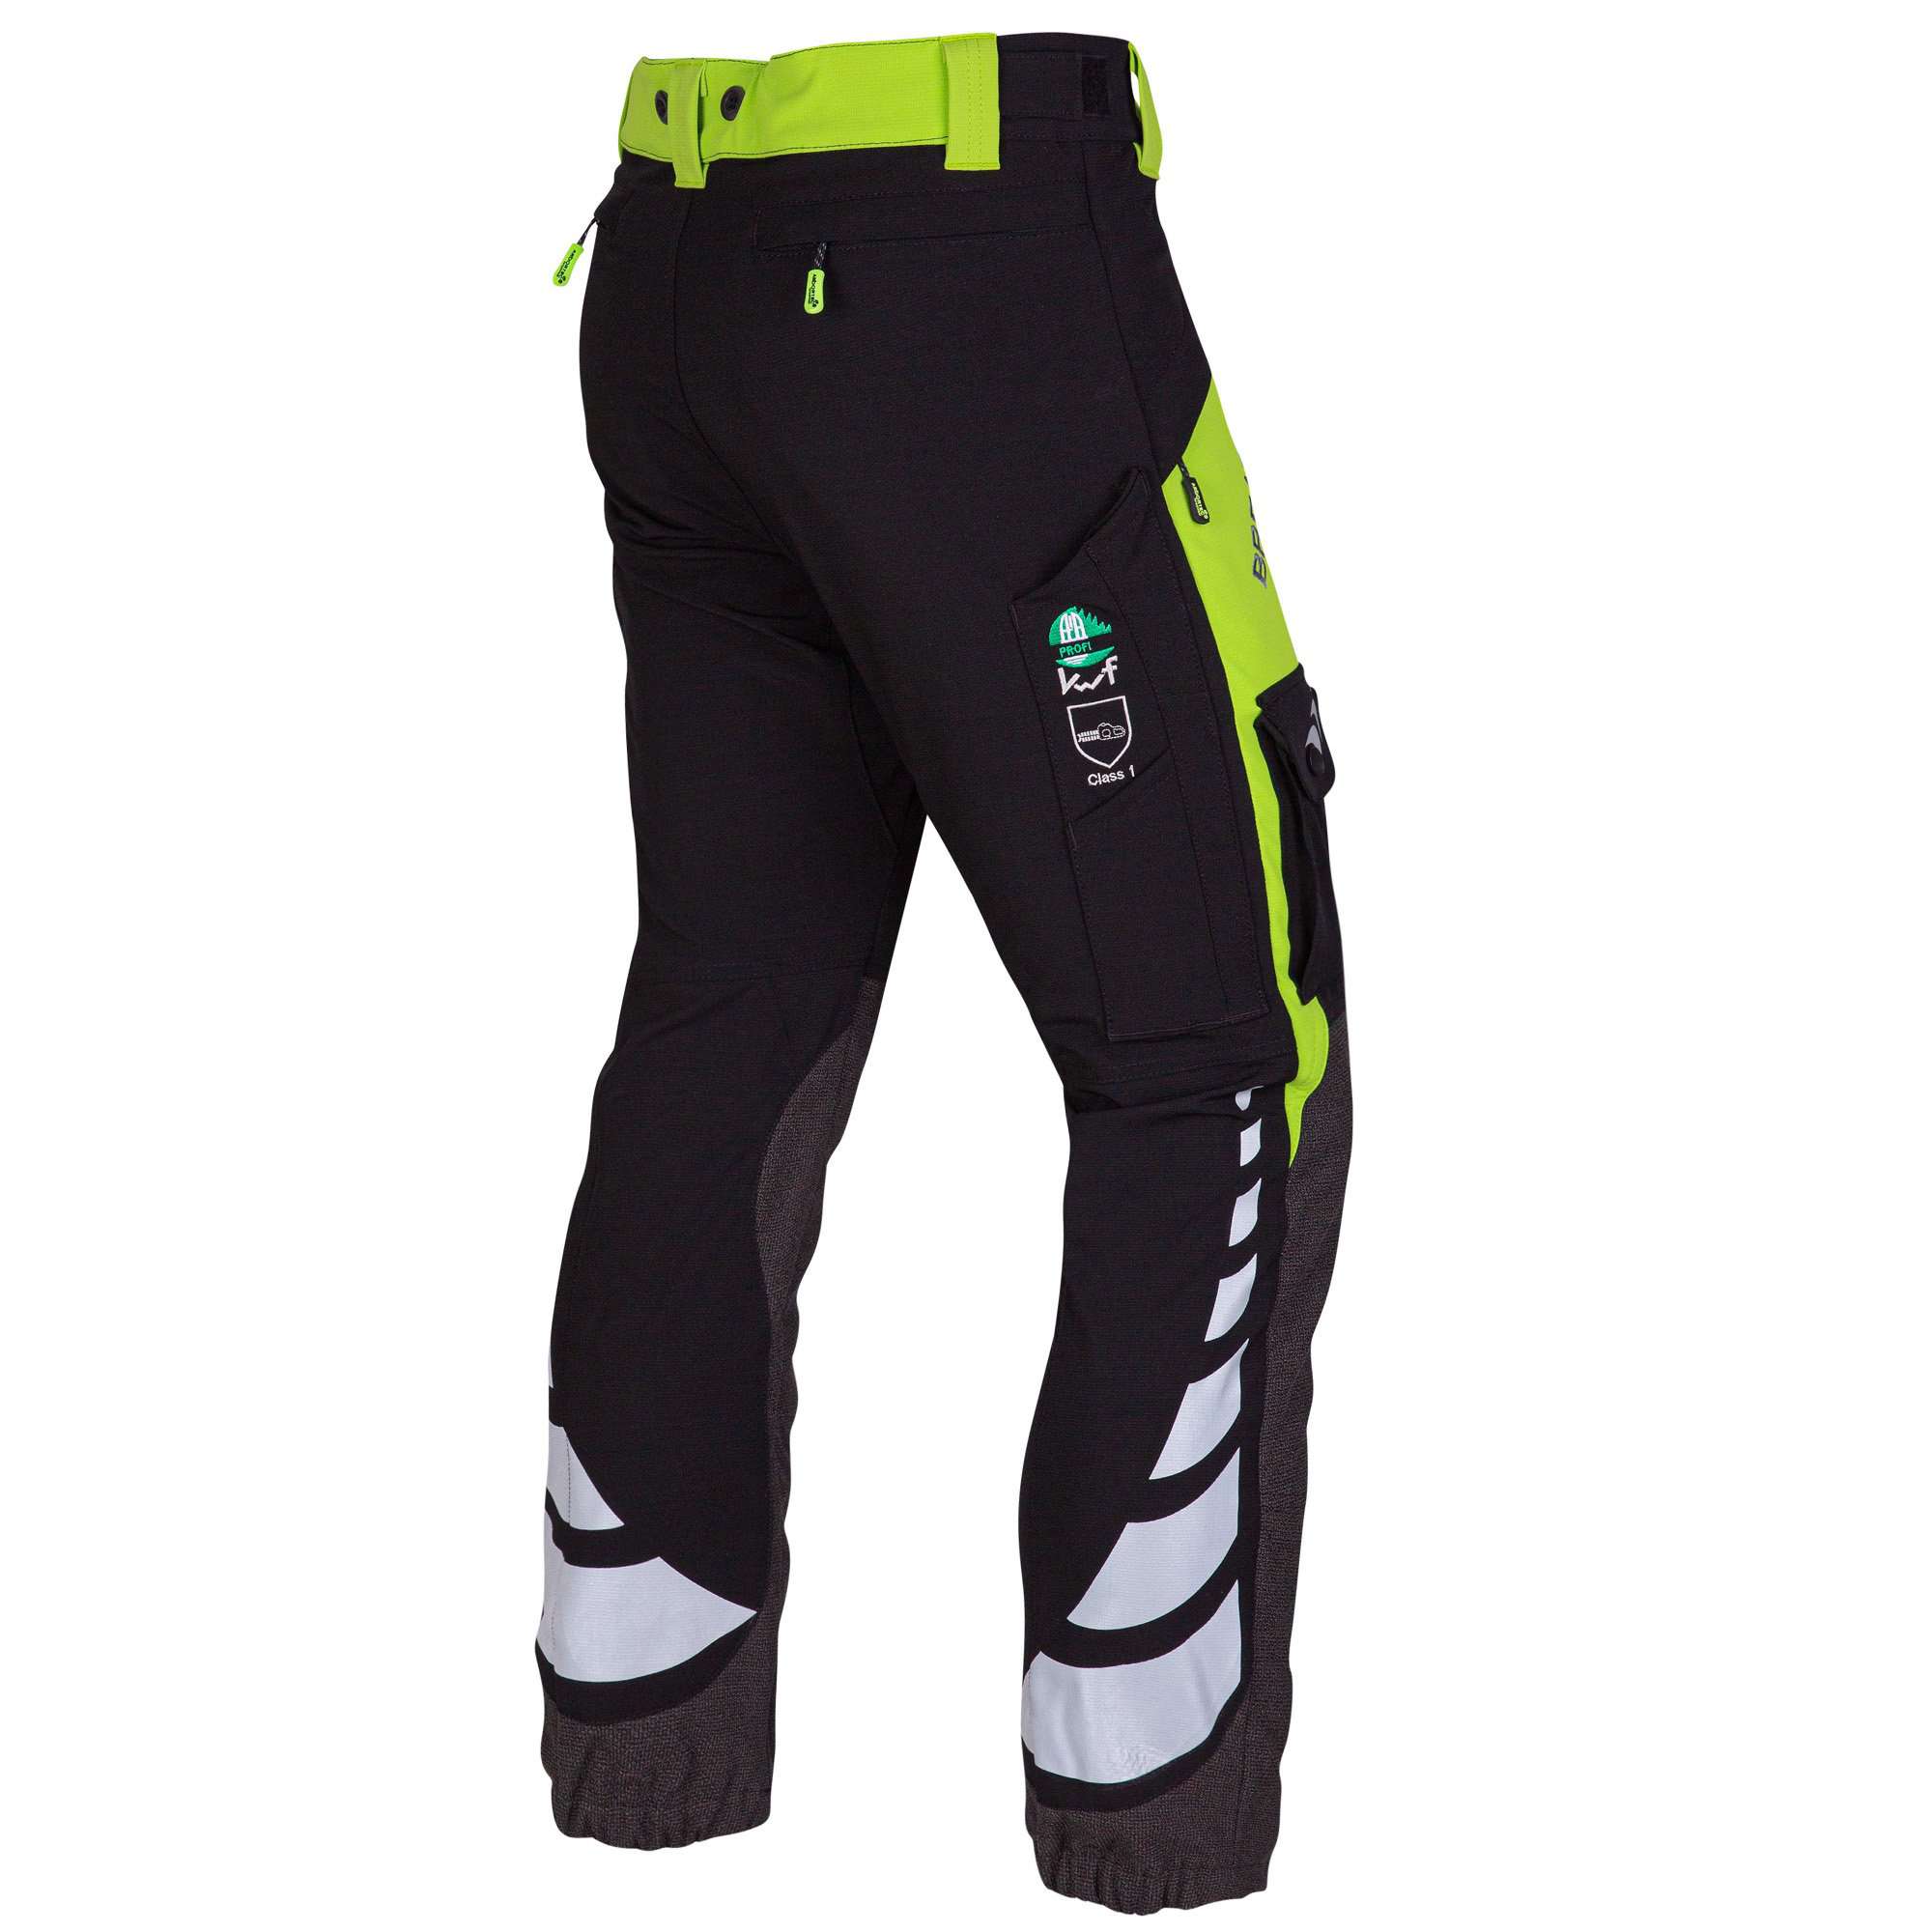 AT4010 Breatheflex Ladies Type A Class 1 Chainsaw Trousers - Lime - Arbortec Forestwear